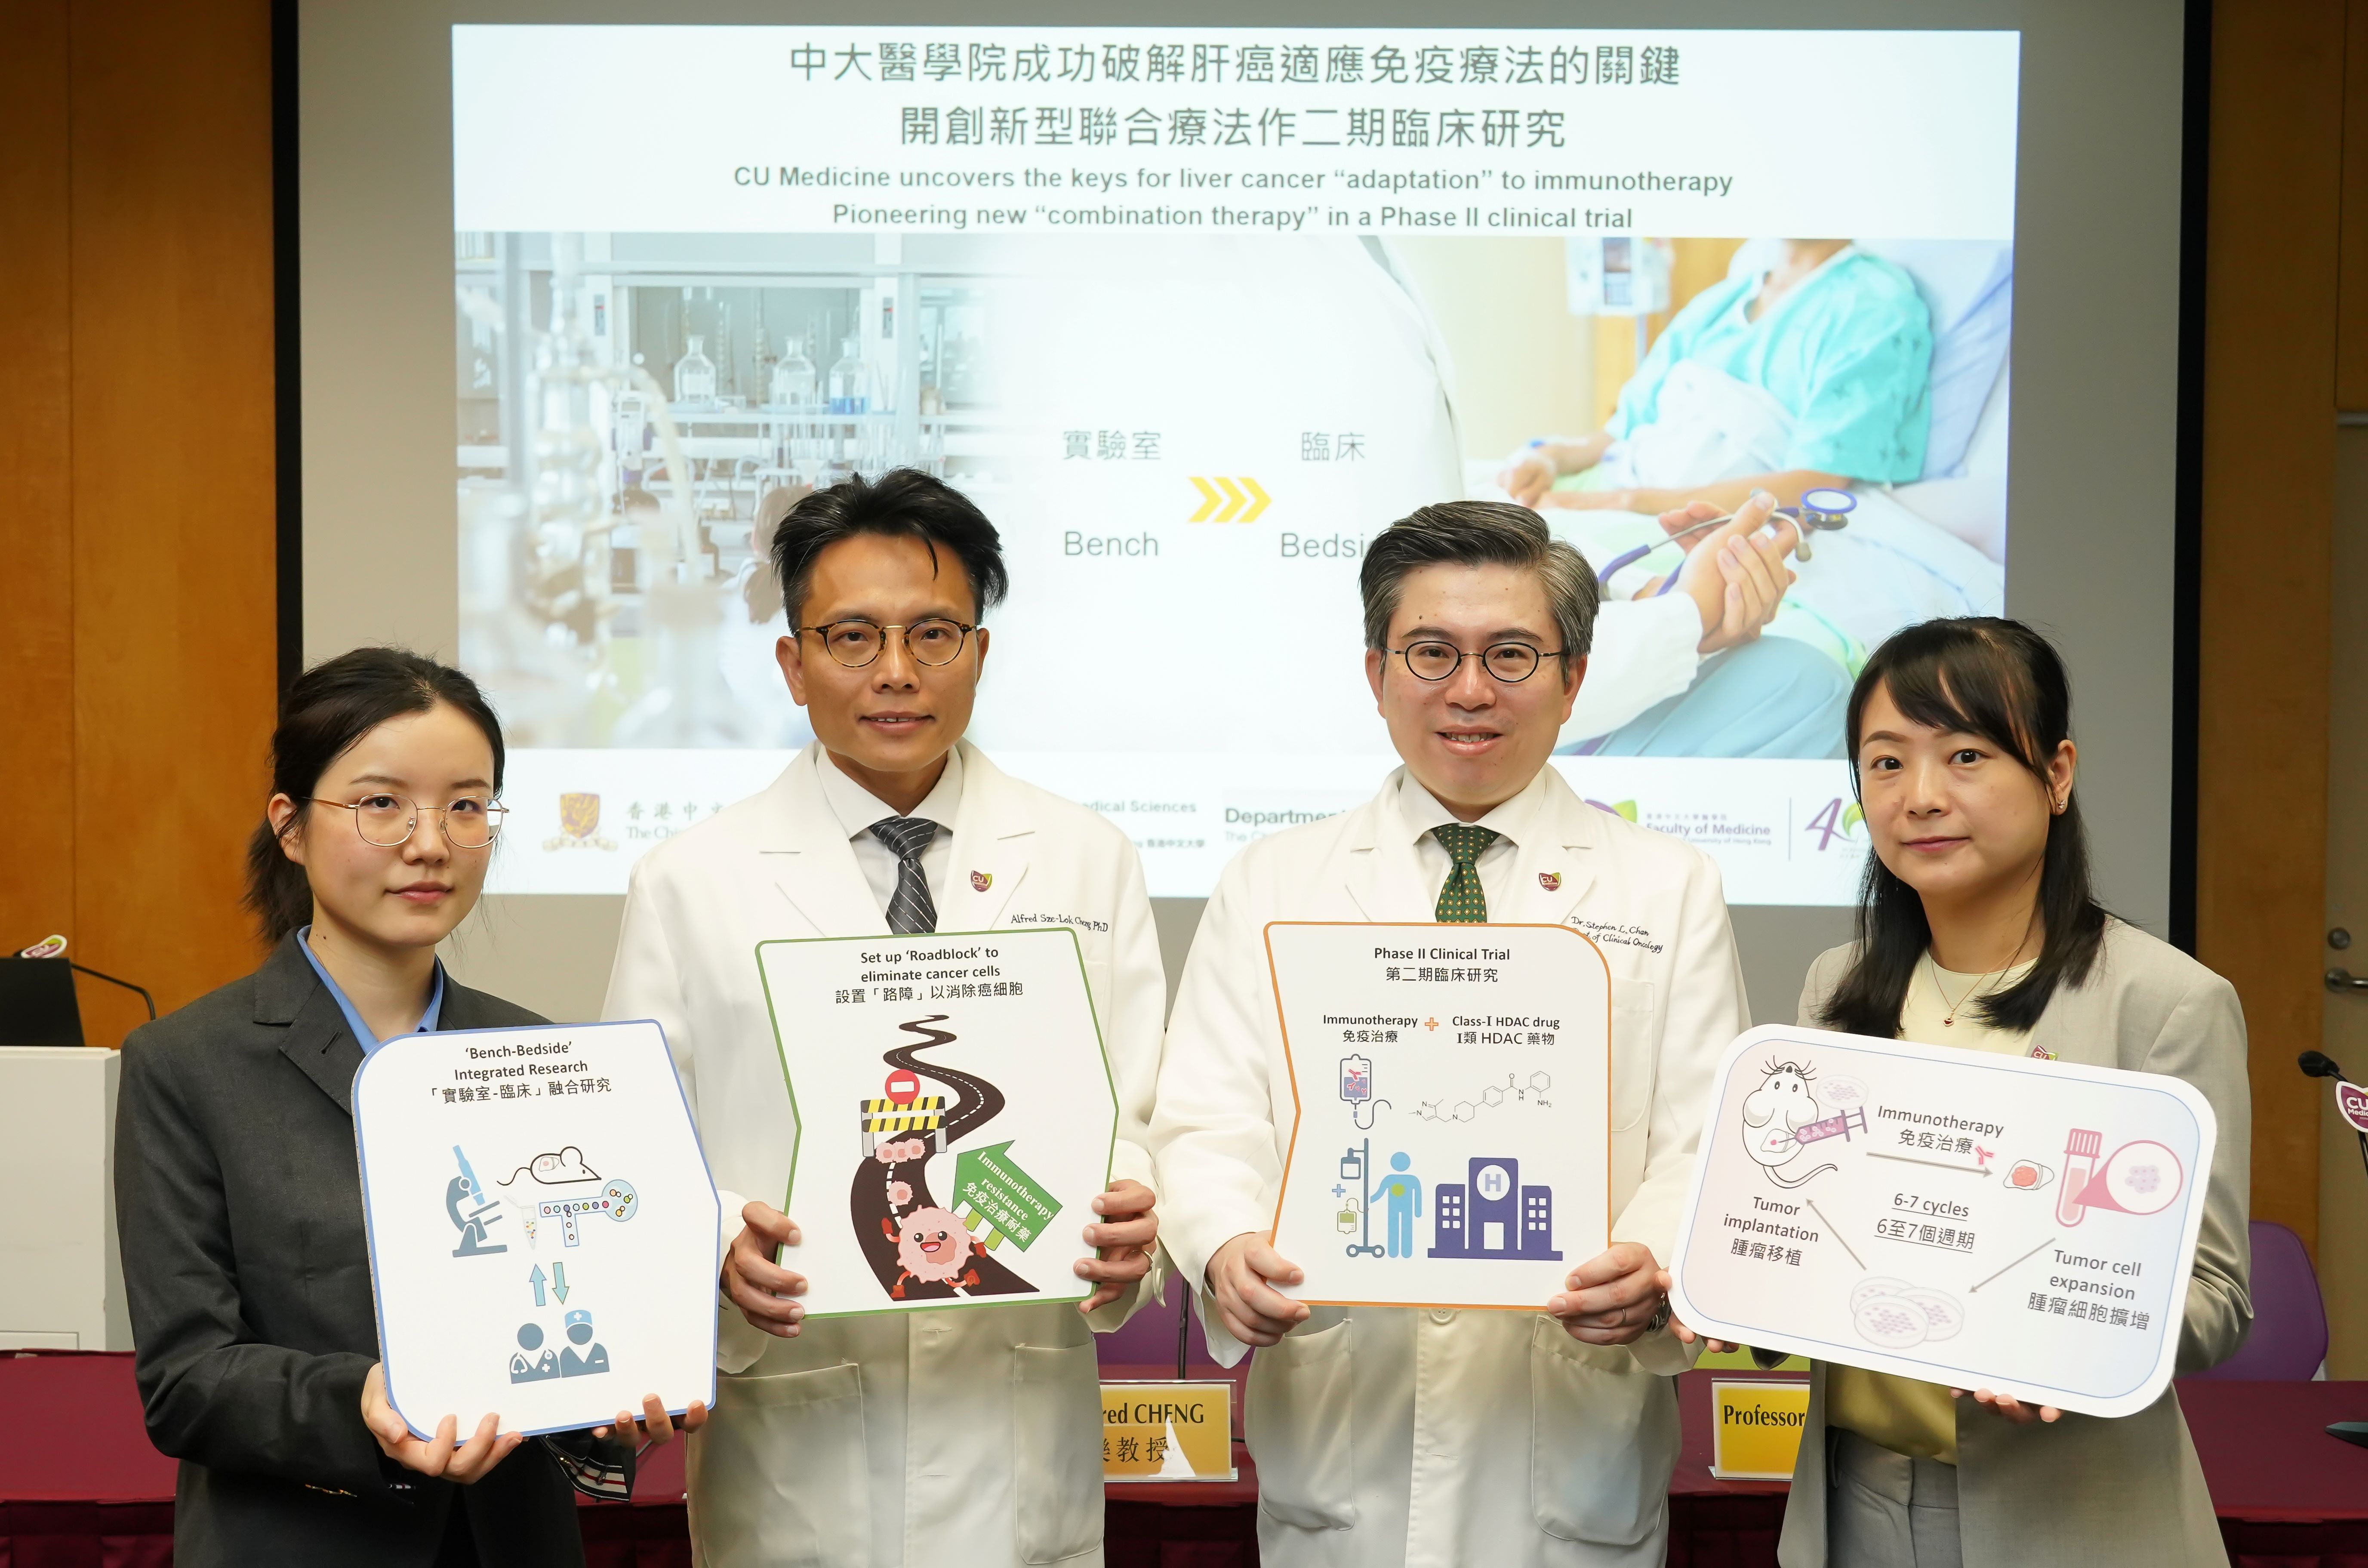 (From left) Dr Xiong Zhewen, Postdoctoral Fellow of the School of Biomedical Sciences (SBS); Professor Alfred Cheng, Professor of SBS; Professor Stephen Chan, Professor of the Department of Clinical Oncology; and Professor Zhou Jingying, Assistant Professor of SBS, at CU Medicine. 